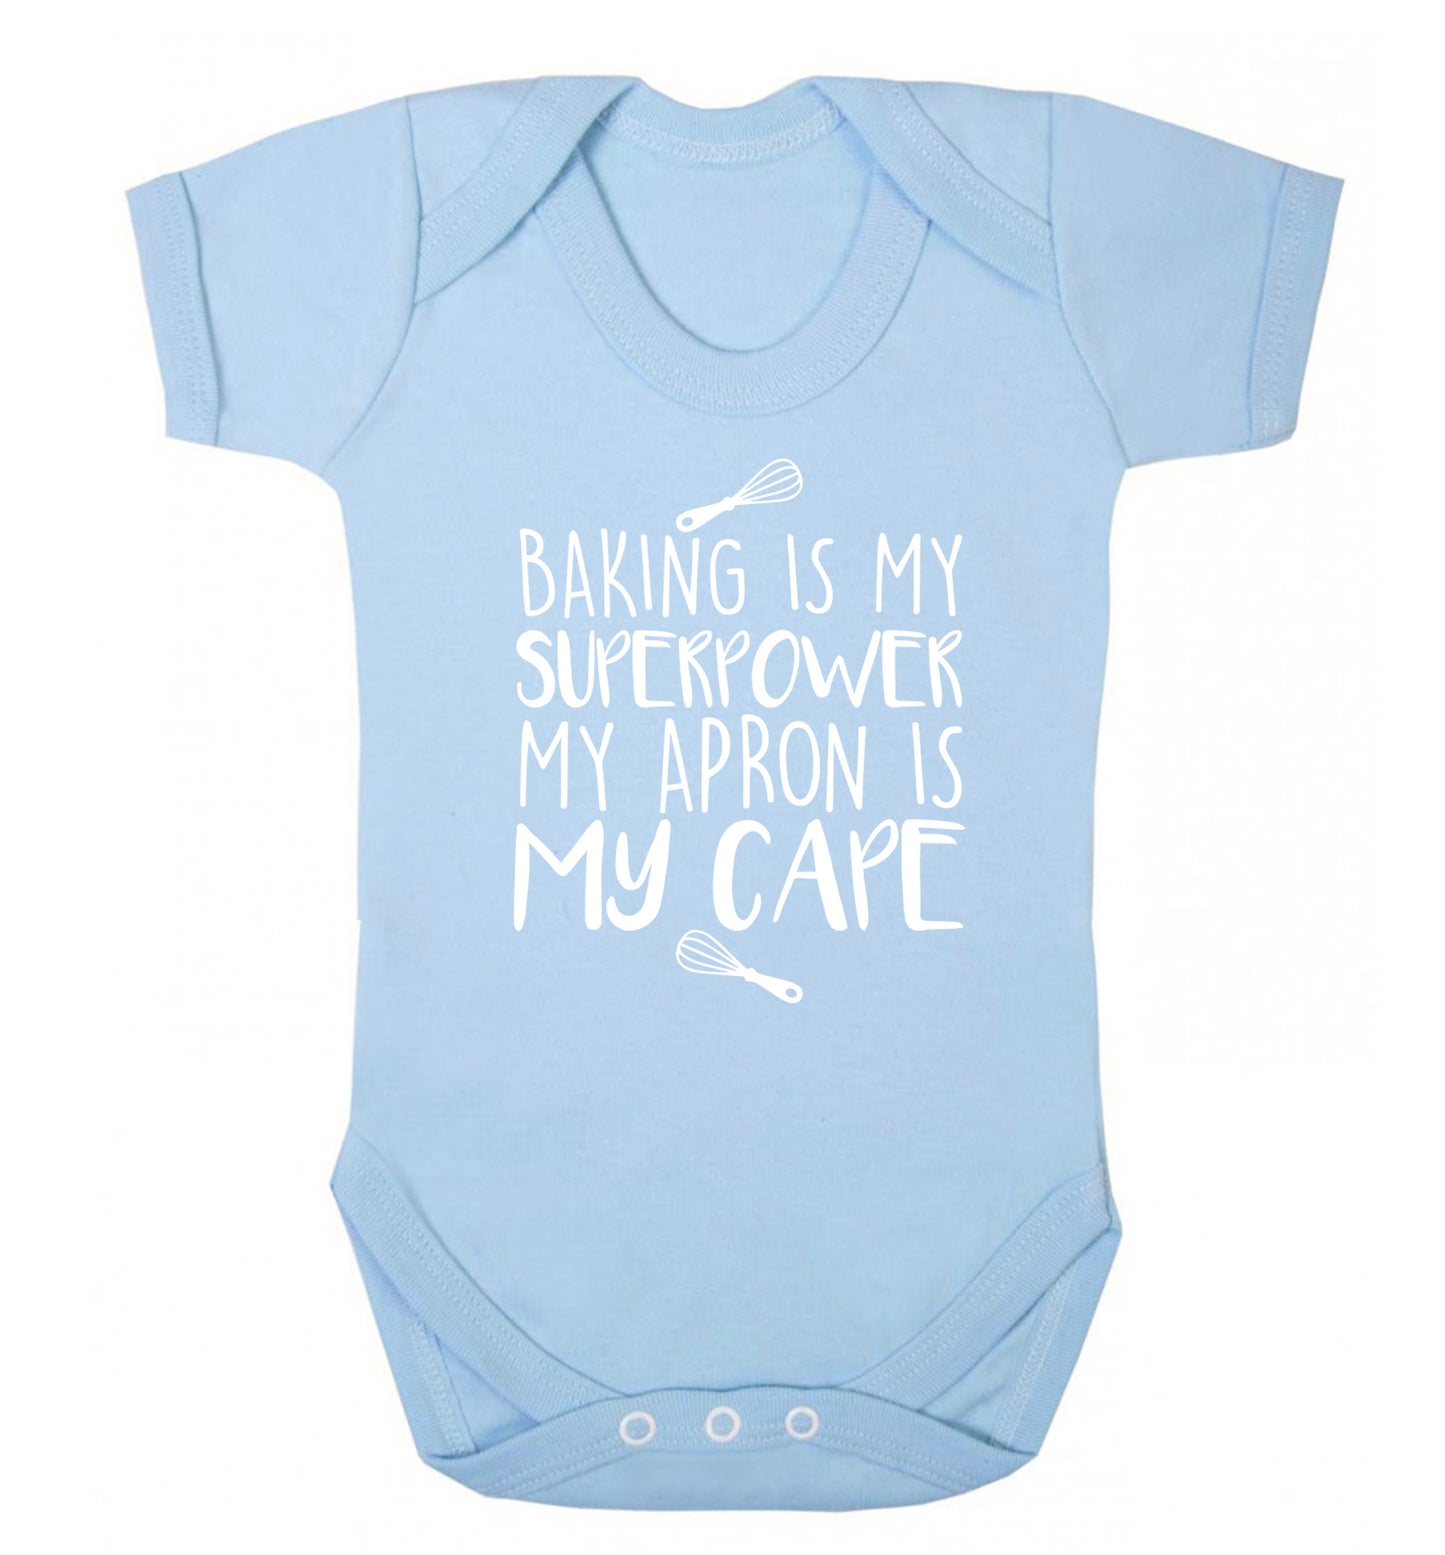 Baking is my superpower my apron is my cape Baby Vest pale blue 18-24 months